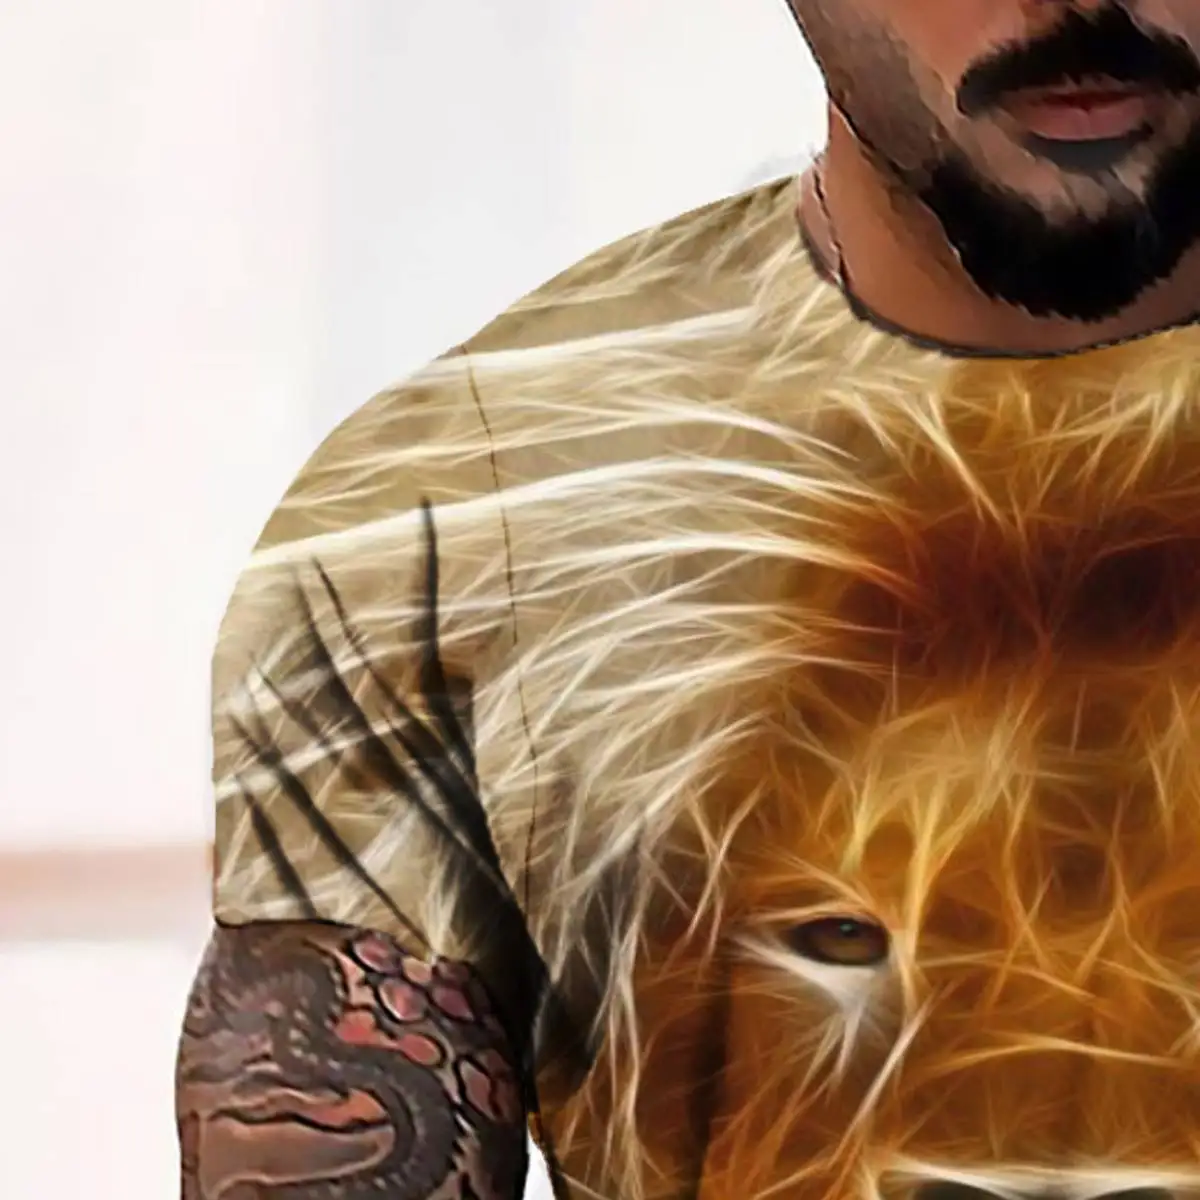 Wholesale Low MOQ Summer Printed Lion Pattern Animal T-Shirt Quick Dry Polyester Street 3d T-Shirt For Men